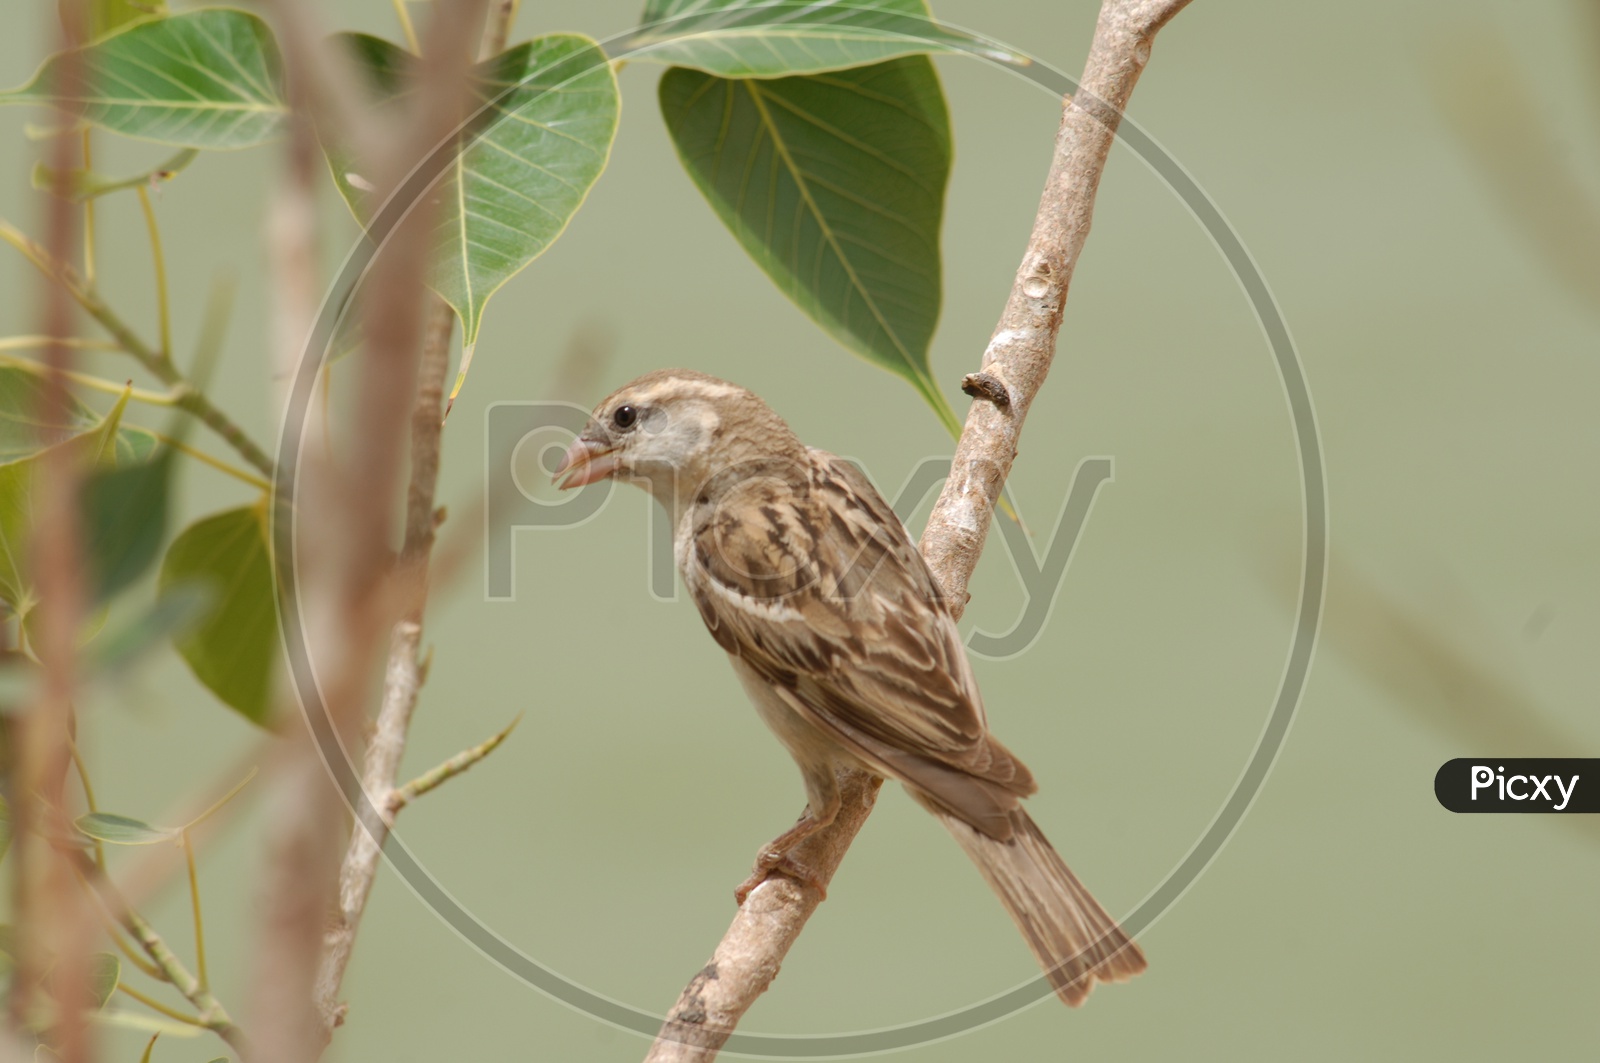 A house sparrow on the branch